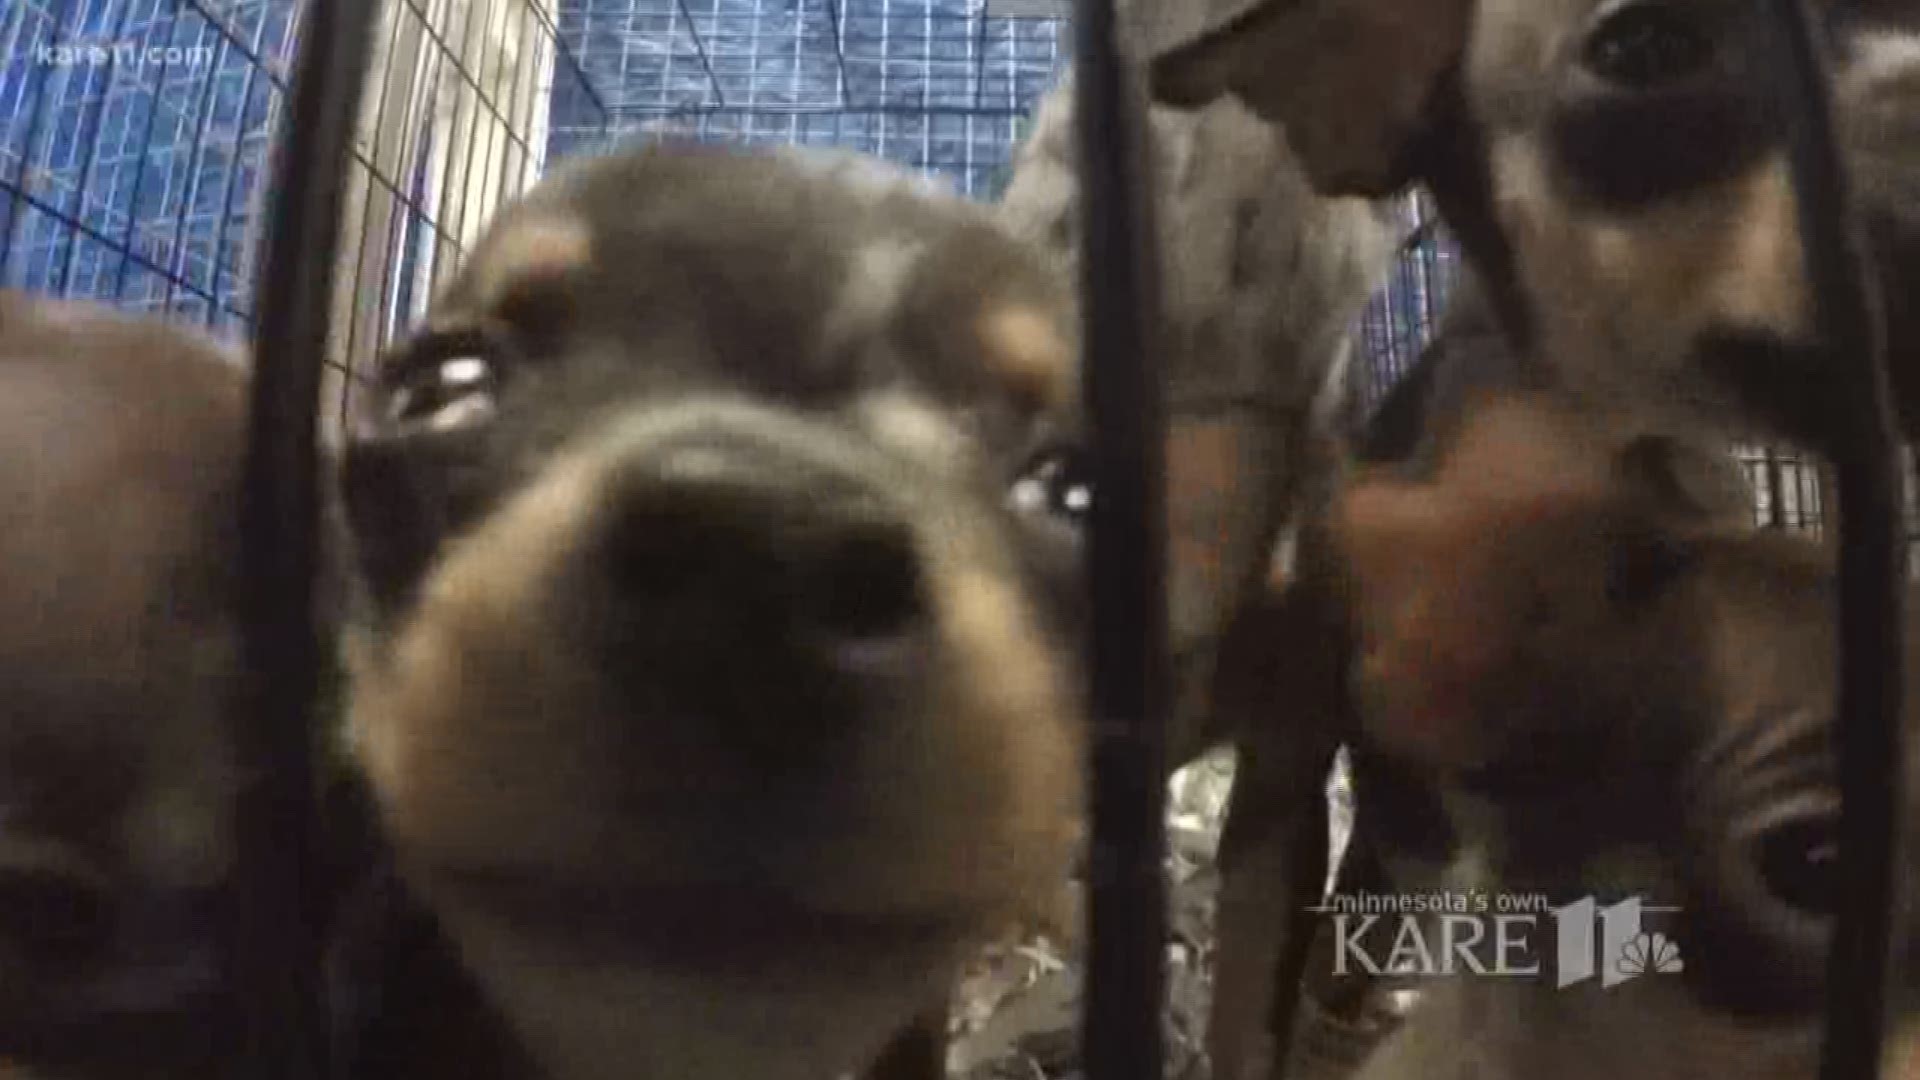 More than 40 Chihuahua mixes were rescued from a home in Carlton County on Wednesday. https://kare11.tv/2GrZnt0